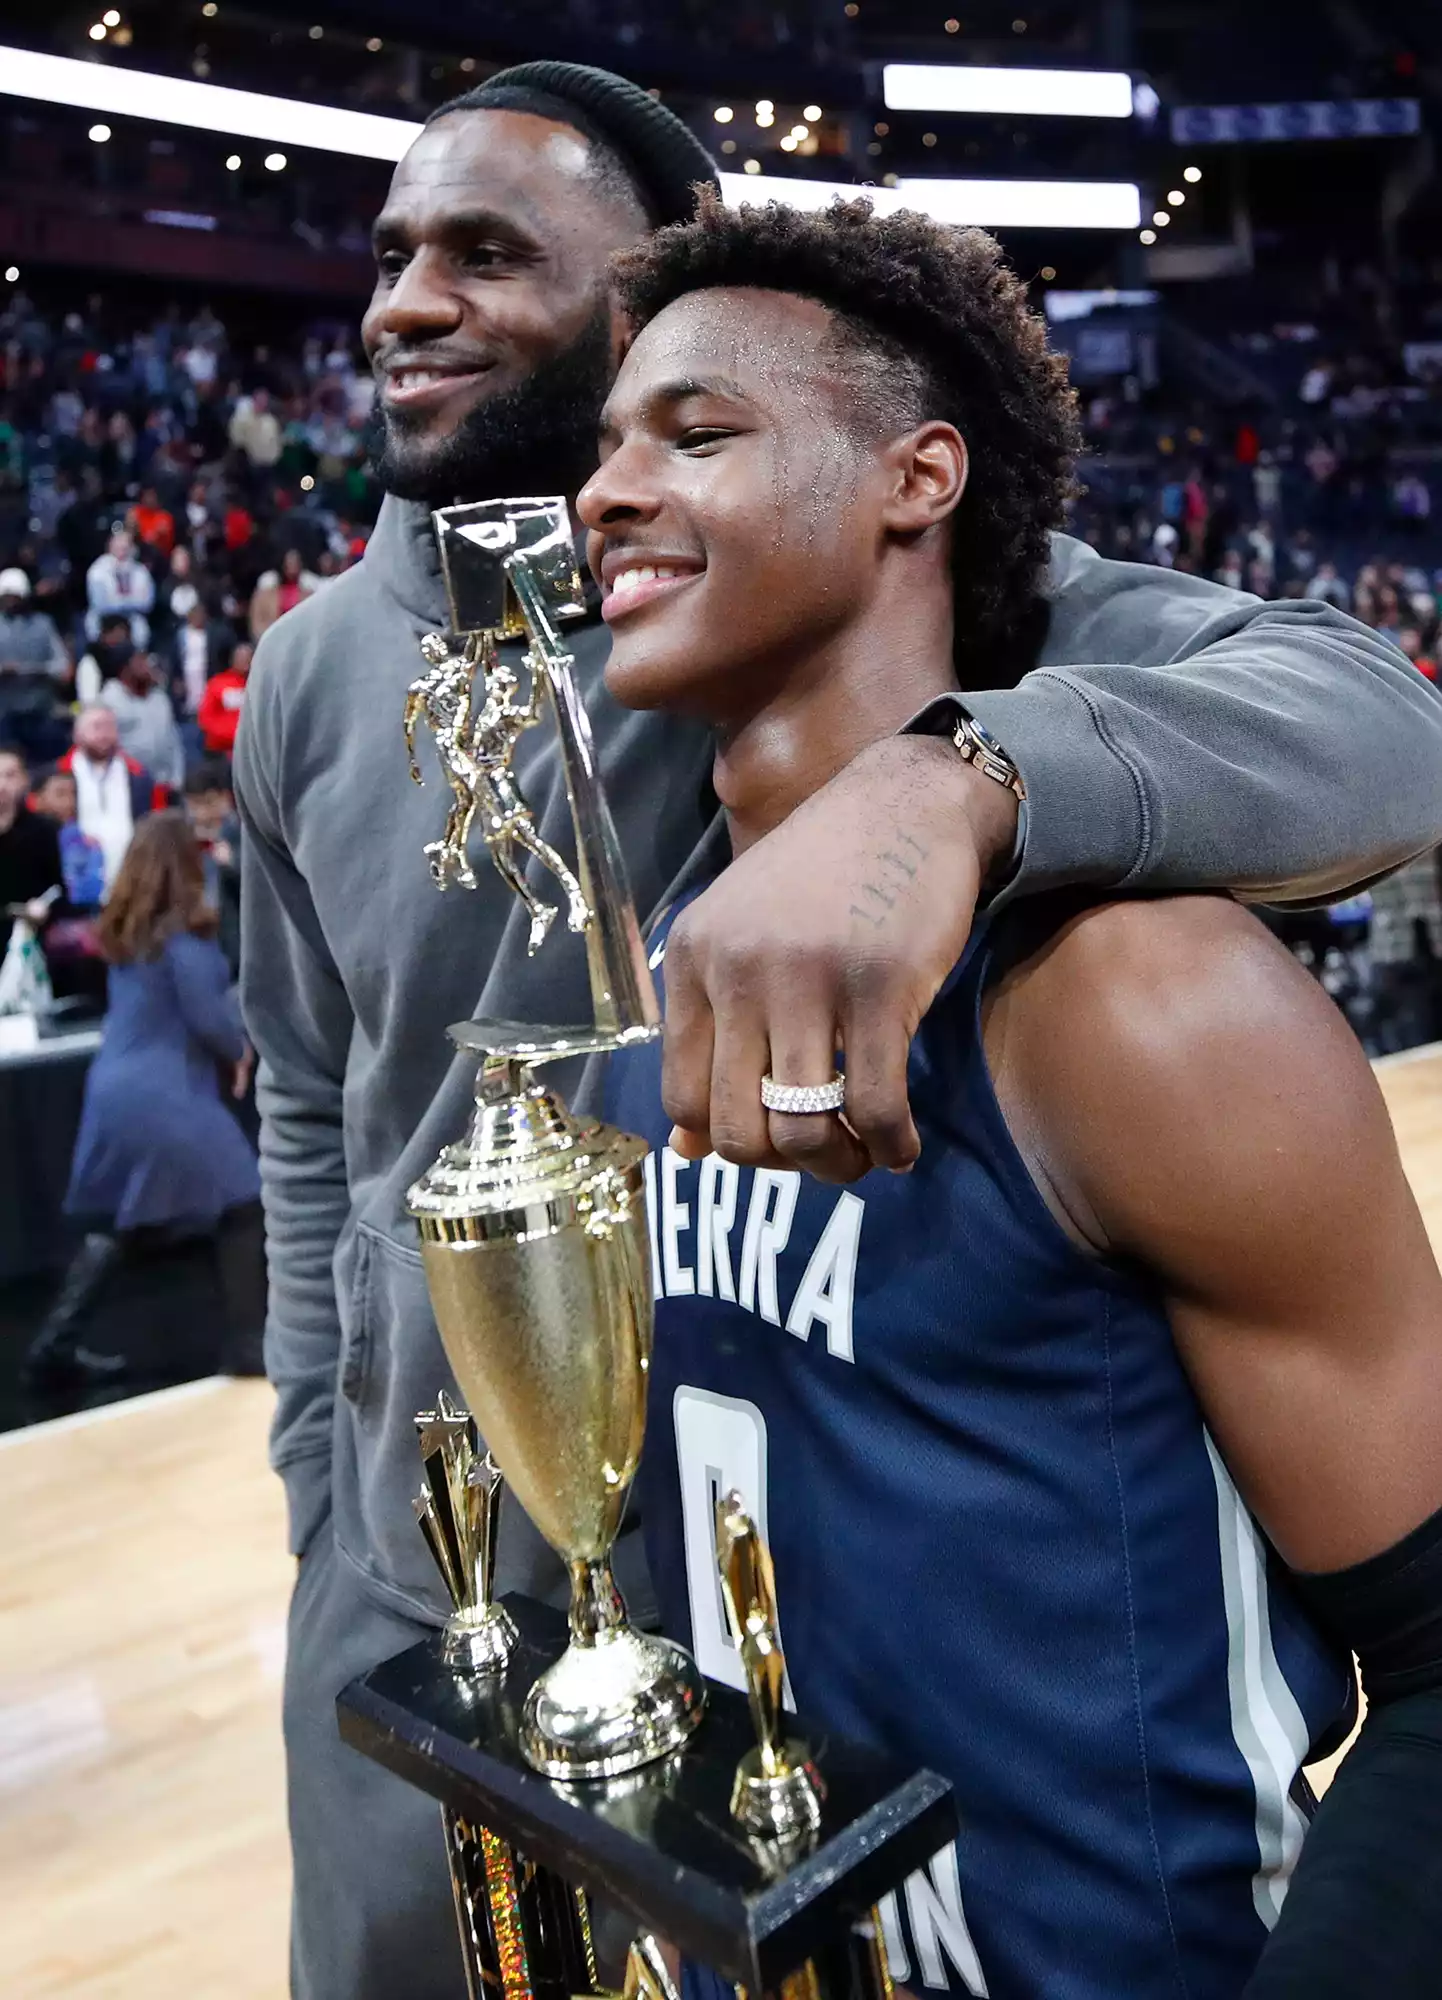 LeBron 'Bronny' James Jr. #0 of Sierra Canyon High School with his father LeBron James of the Los Angeles Lakers